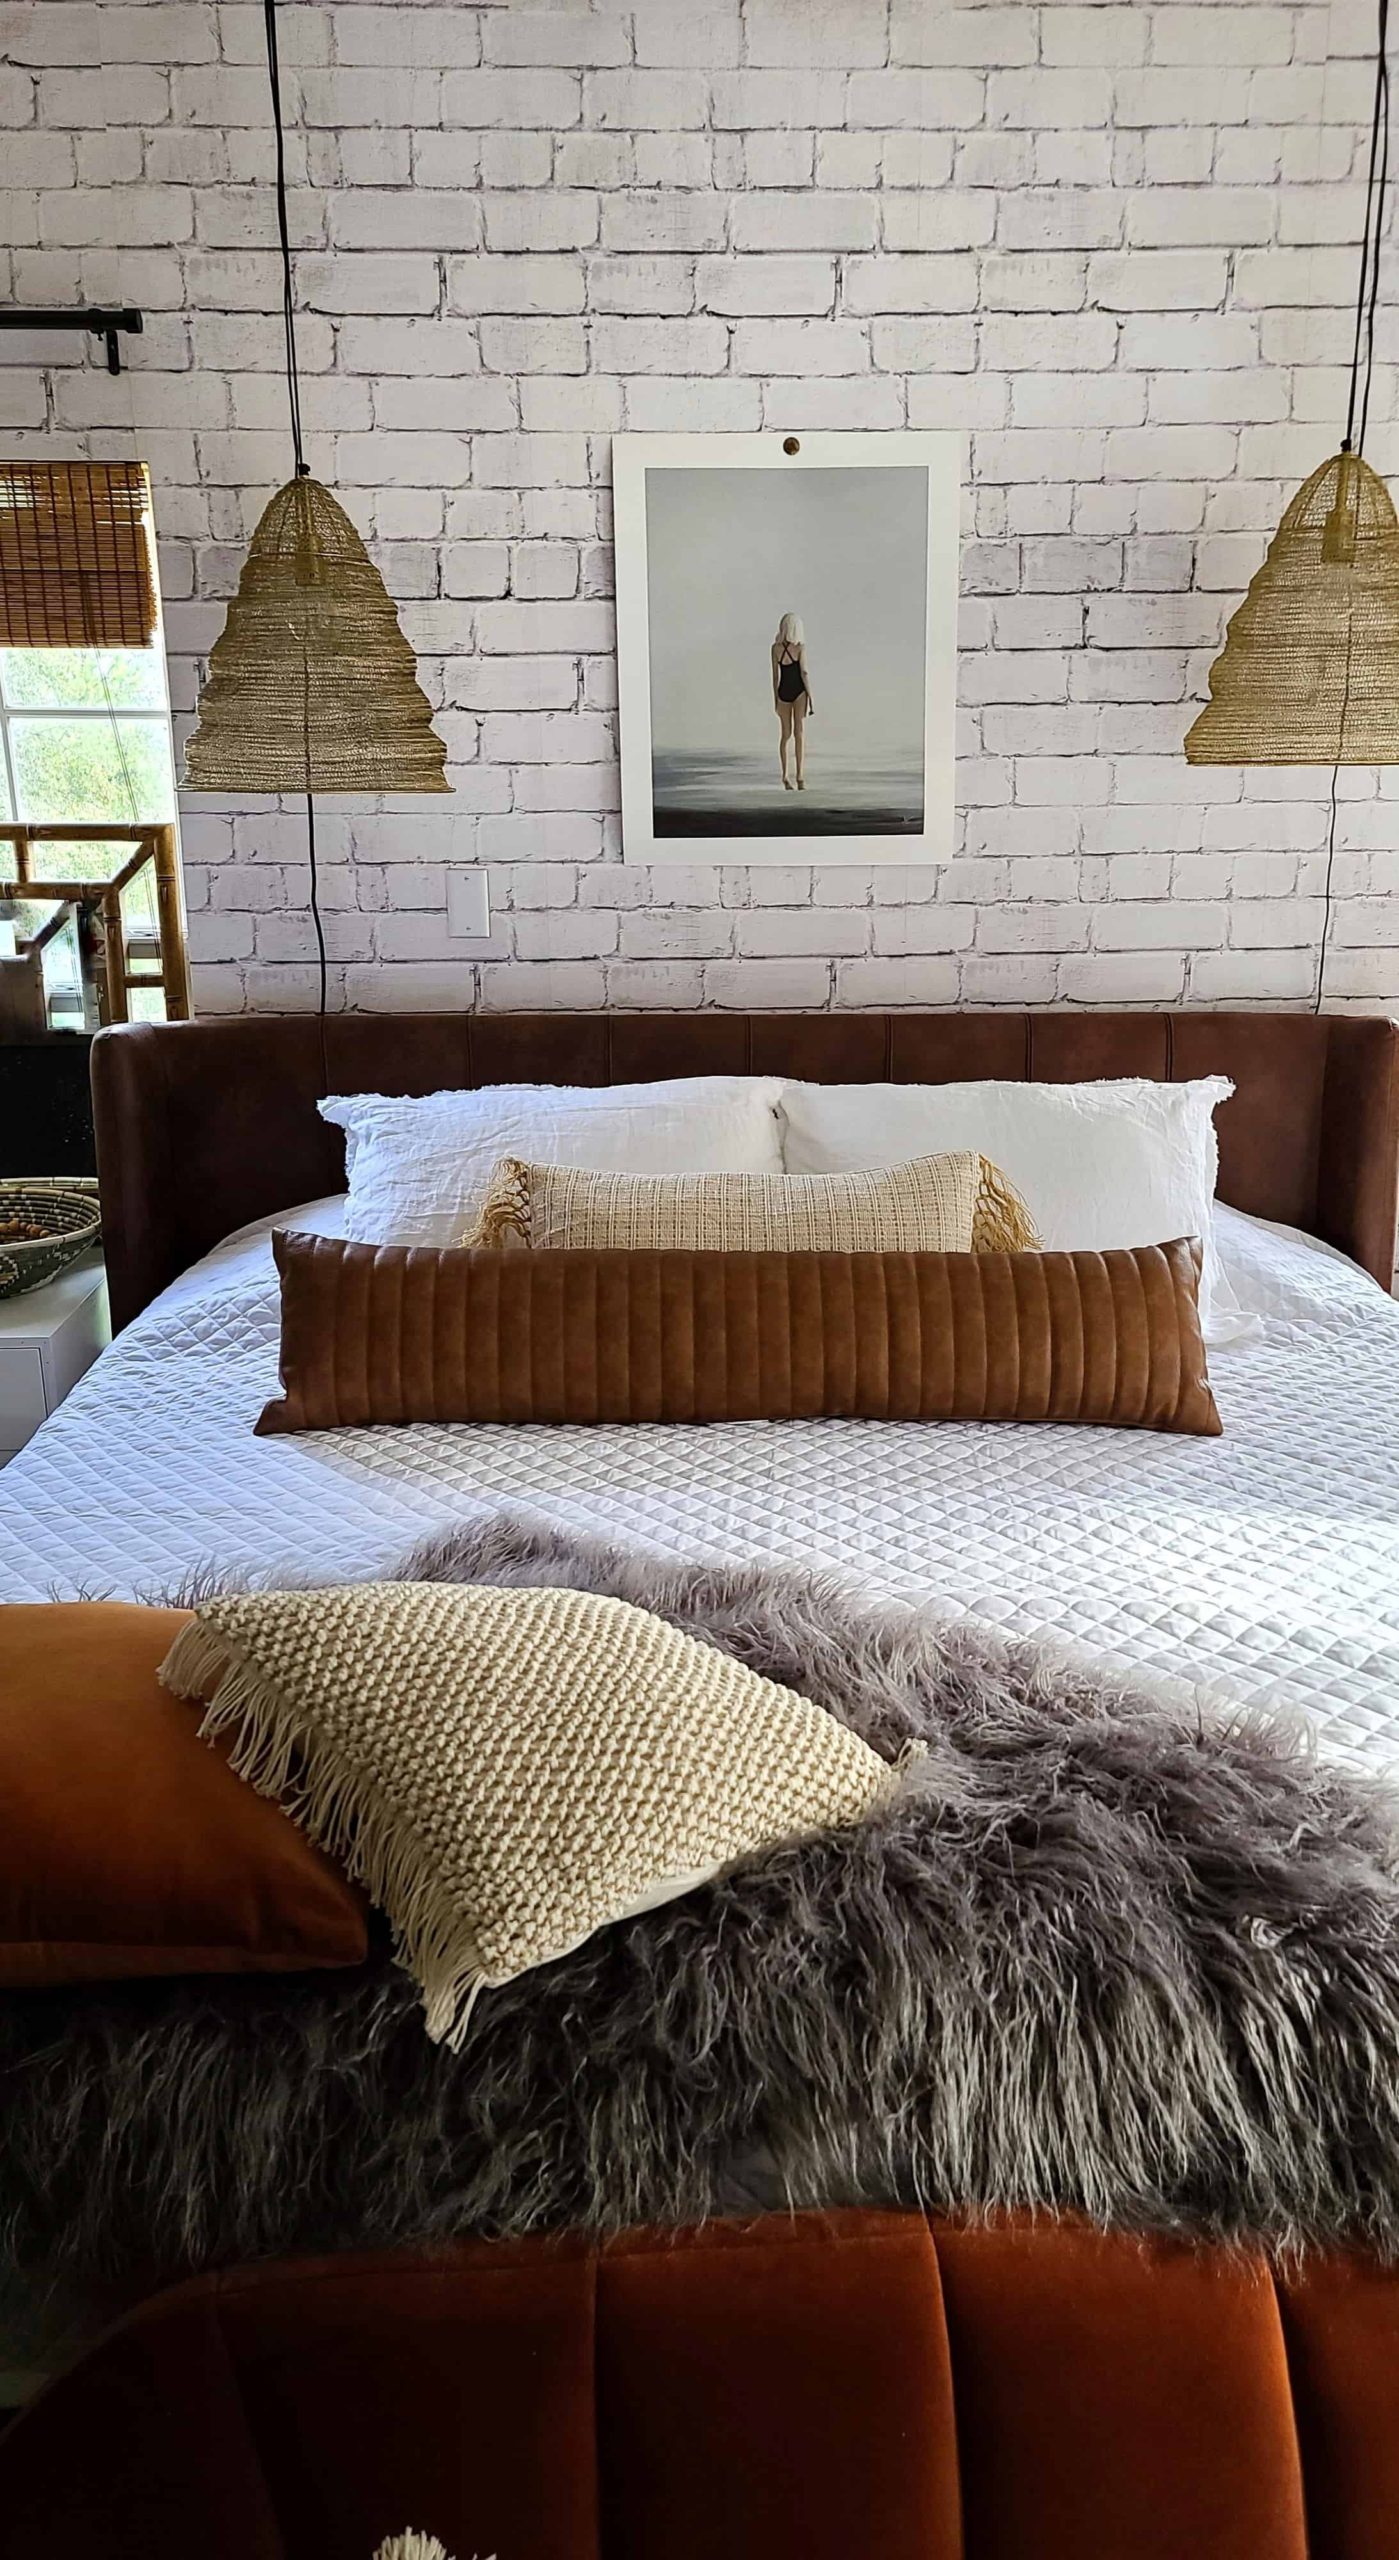 Joss & Main Master Bedroom Bed makeover refresh industrial modern farmhouse eclectic boho glam brick wall cozy fall decor decorating macrame leather headboard king size white neutral